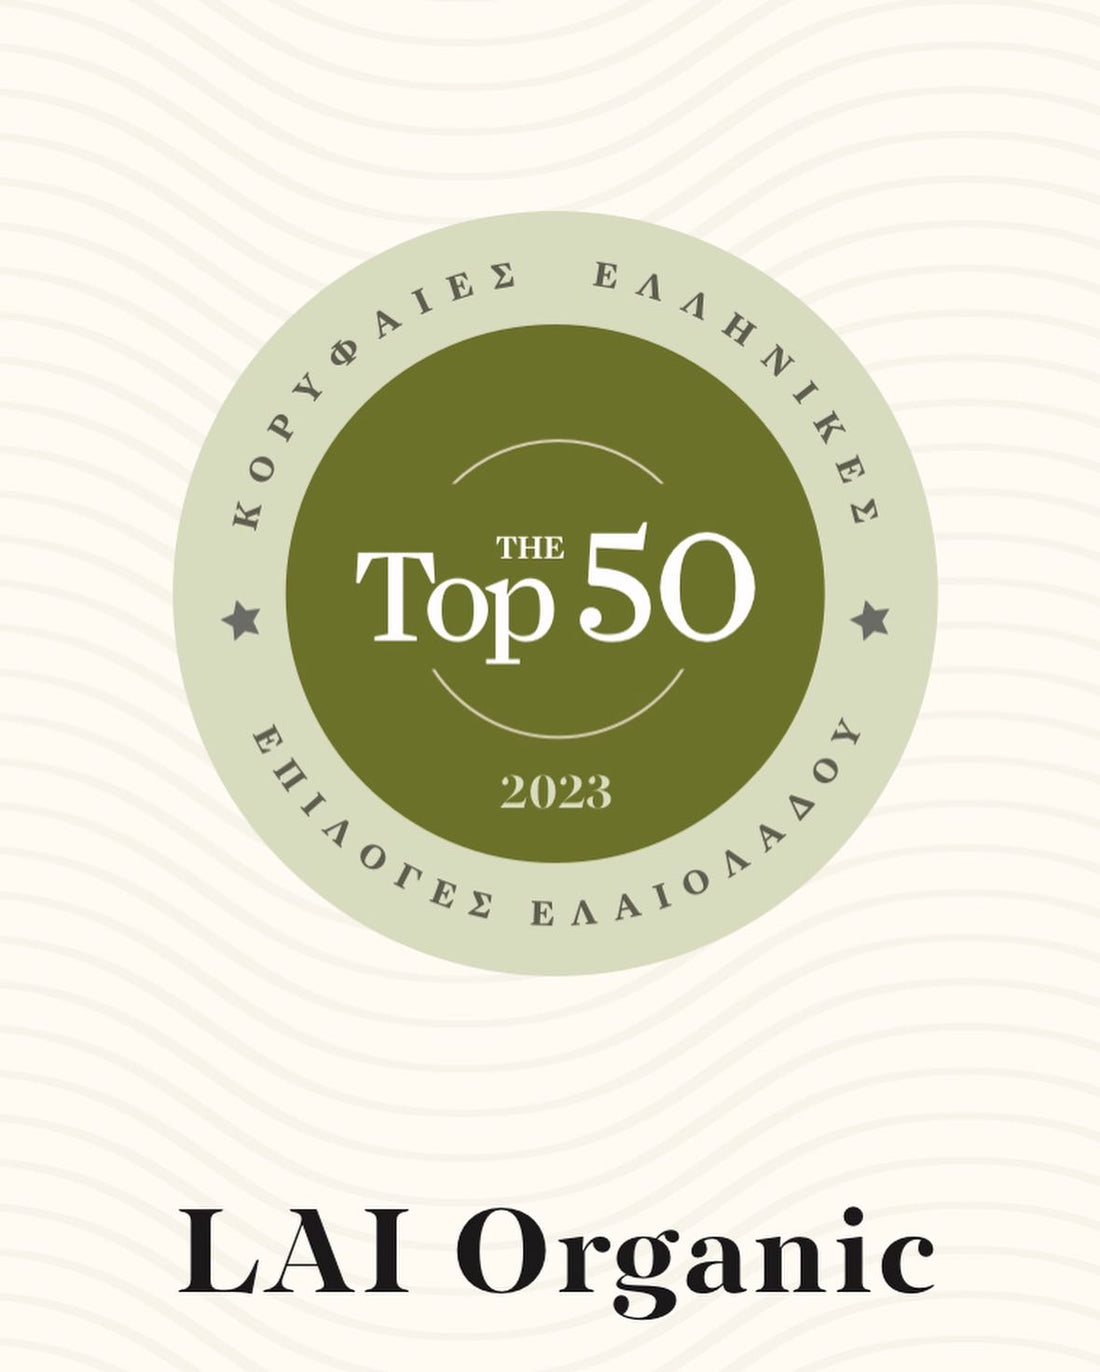 LAI ORGANIC mentioned in the Top 50!